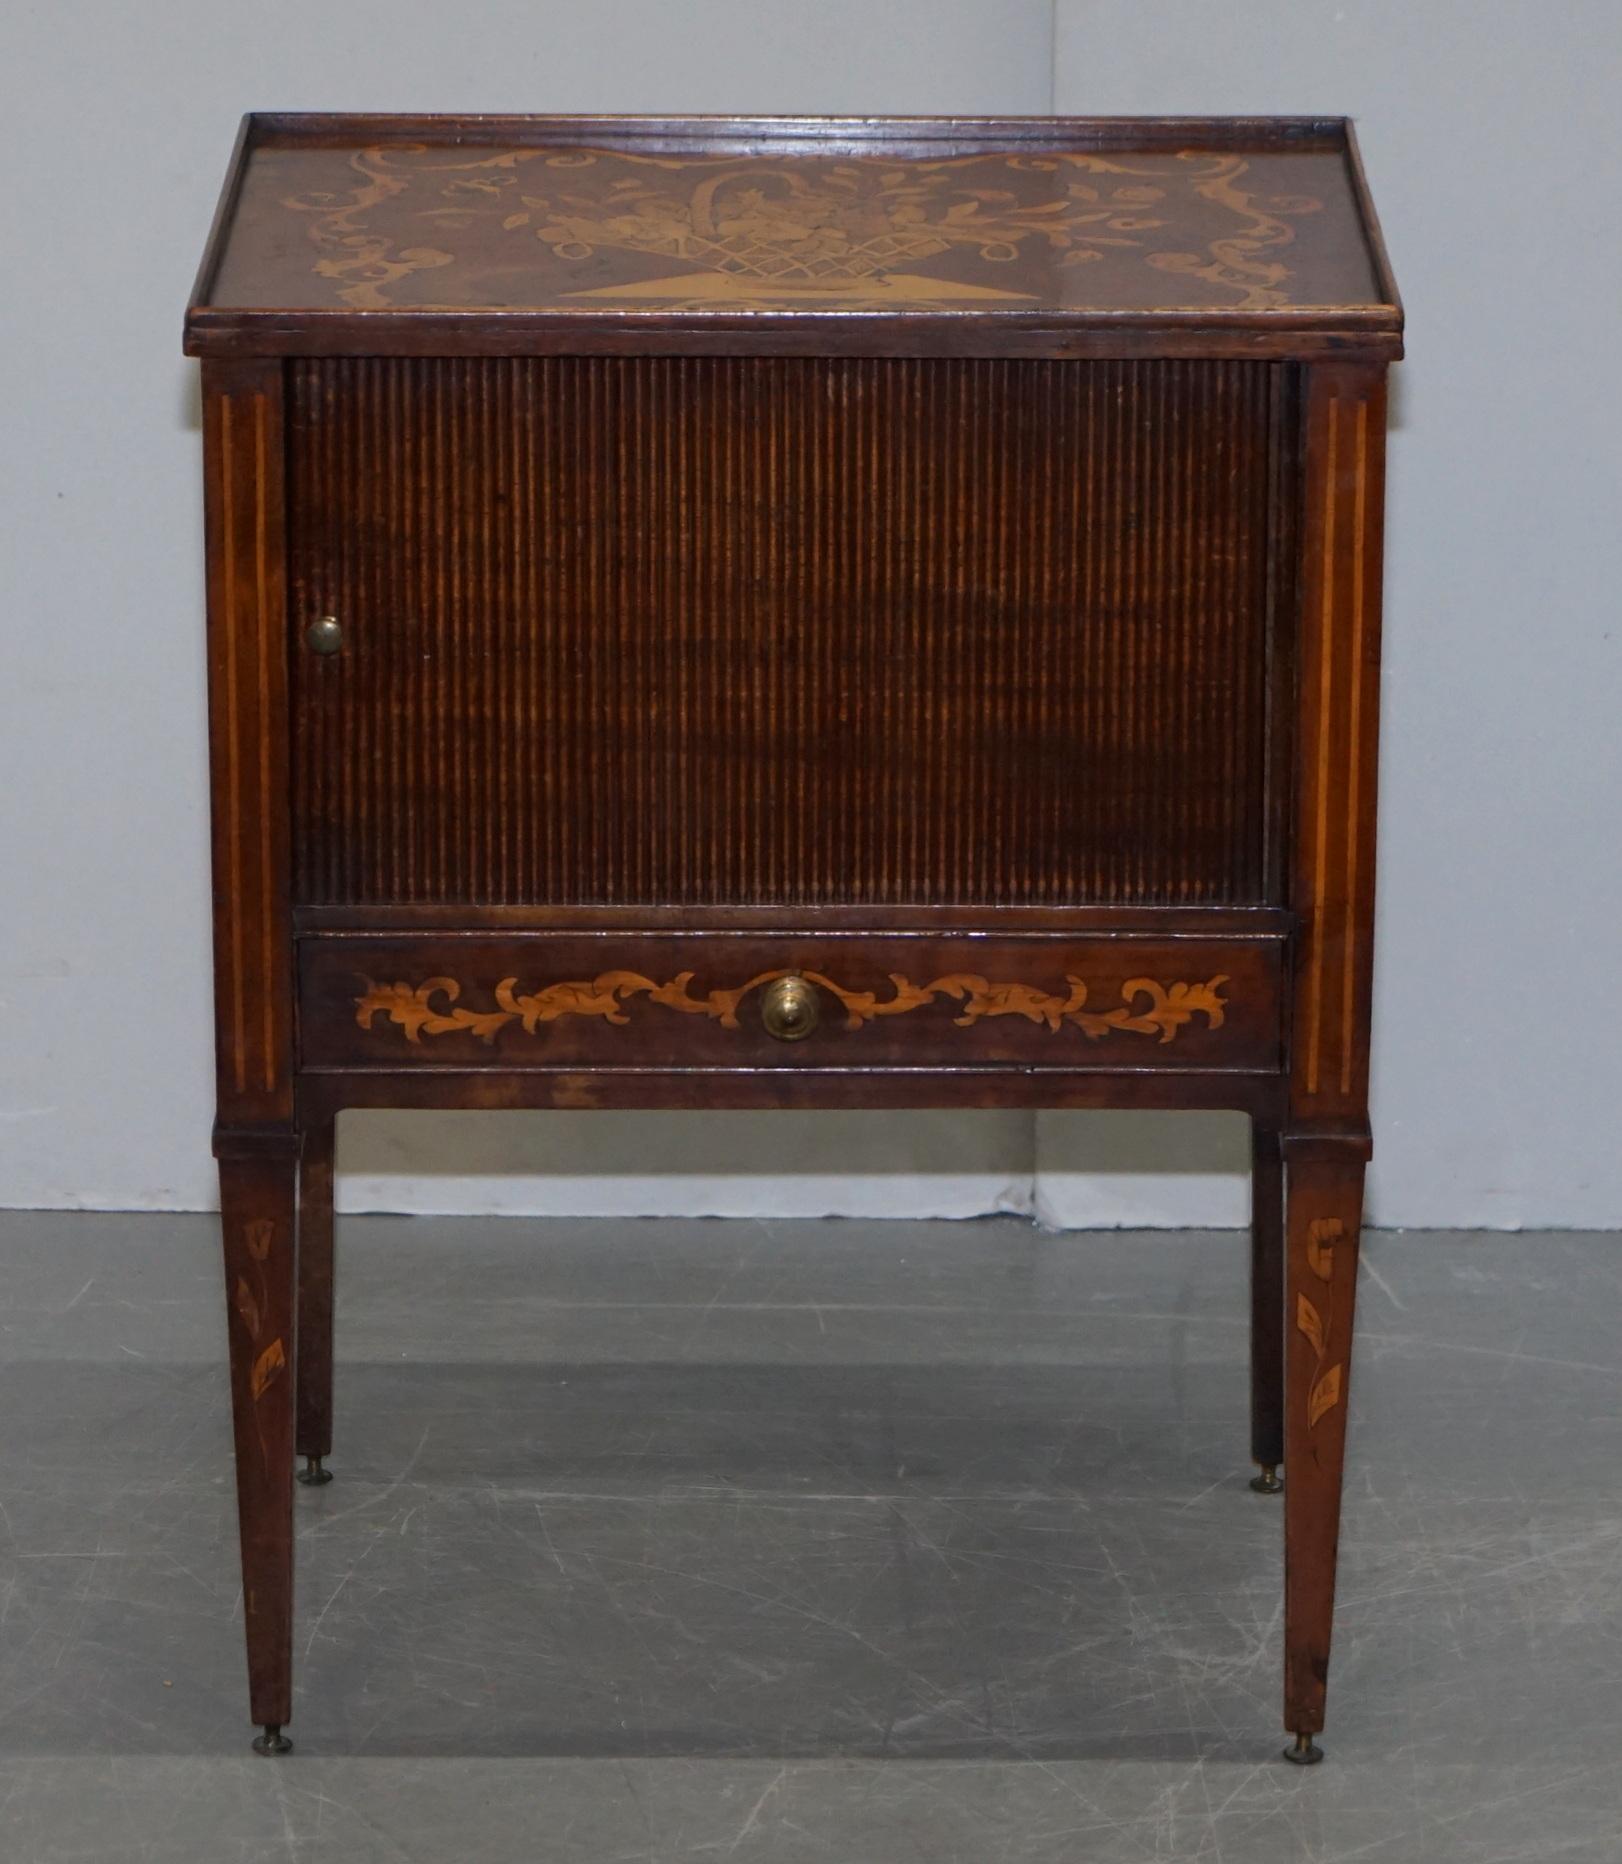 Regency Lovely 19th Century Dutch Marquetry Inlaid Side Table with Tambour Fronted Door For Sale